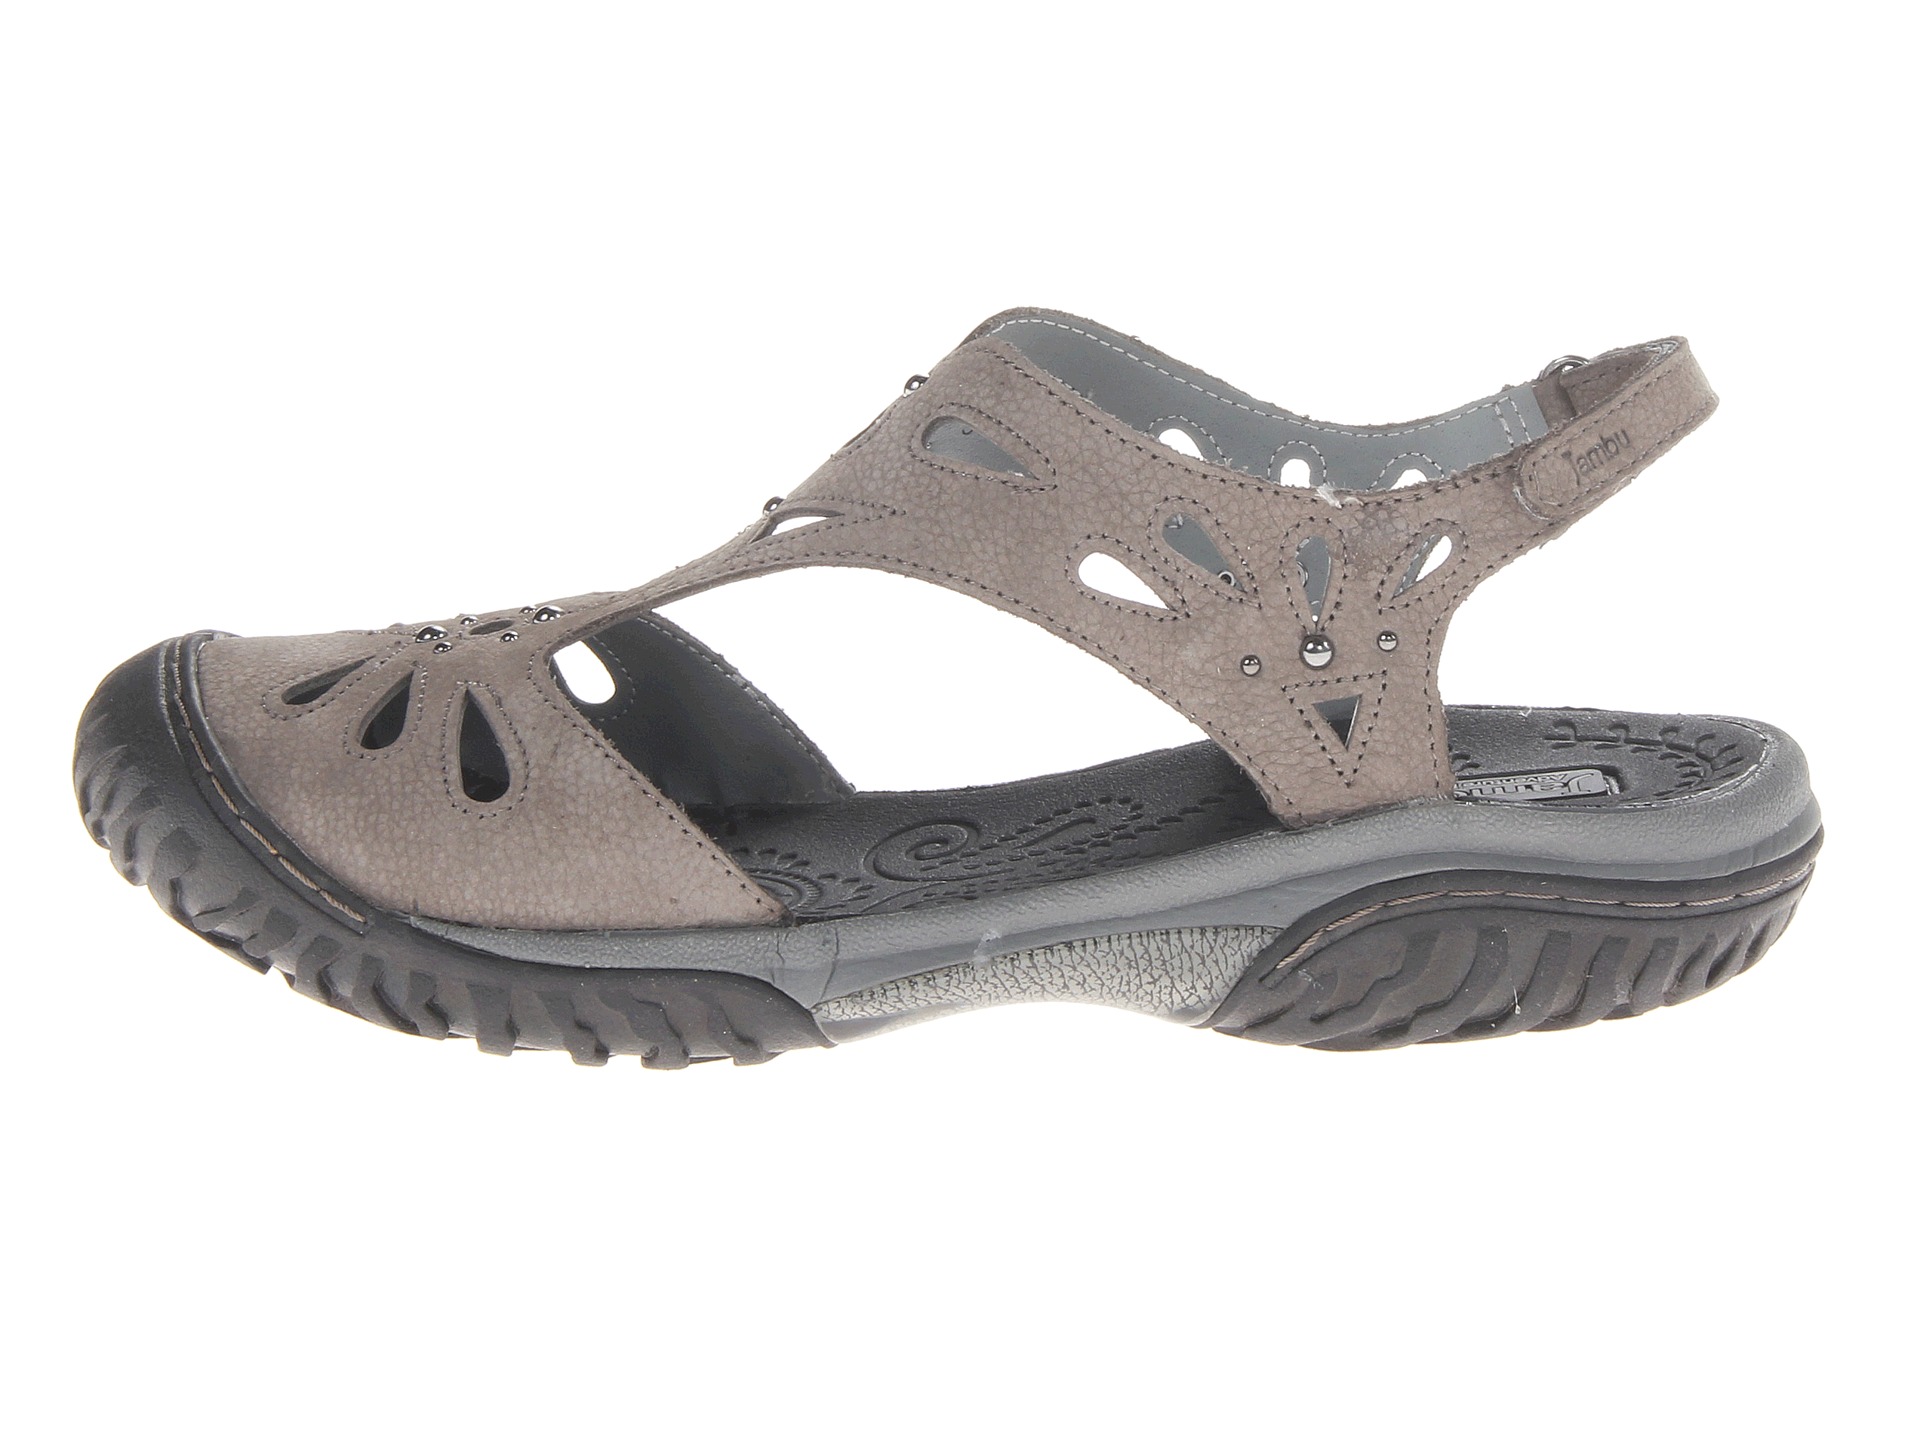 No results for jambu clementine grey - Search Zappos